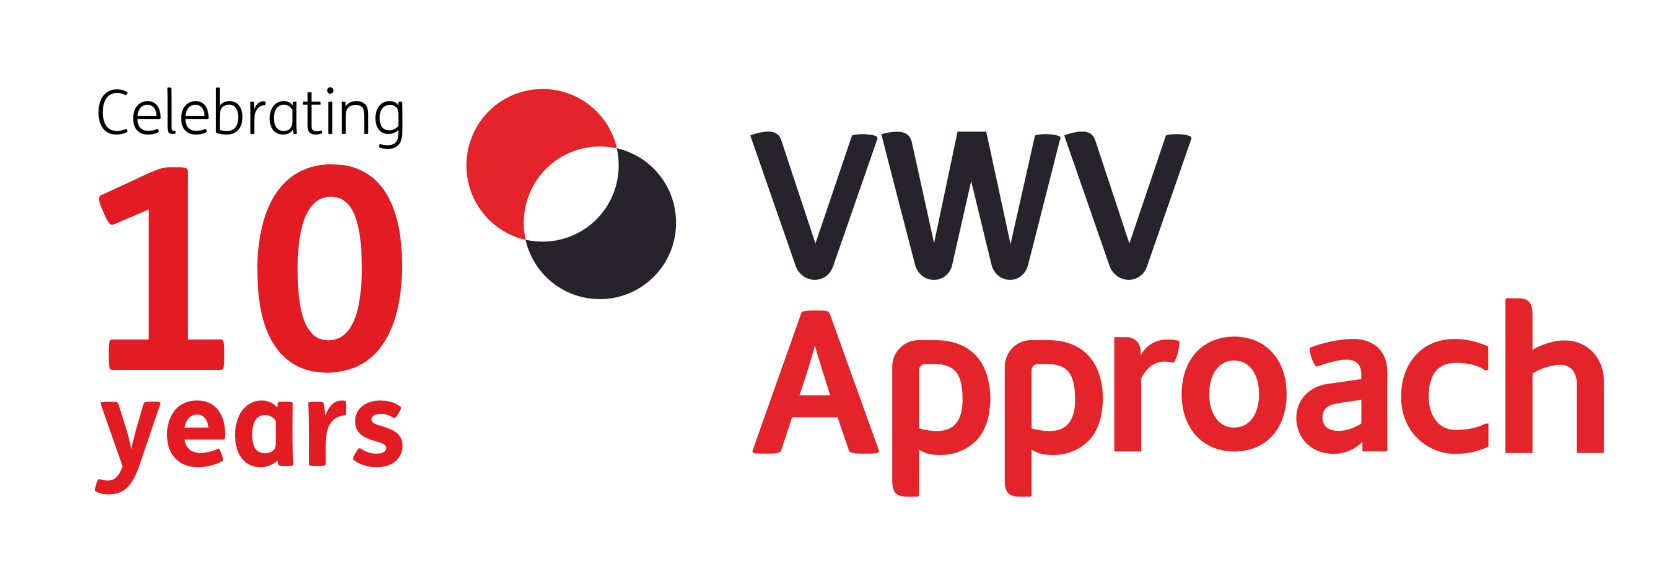 Celebrating 10 years of VWV Approach